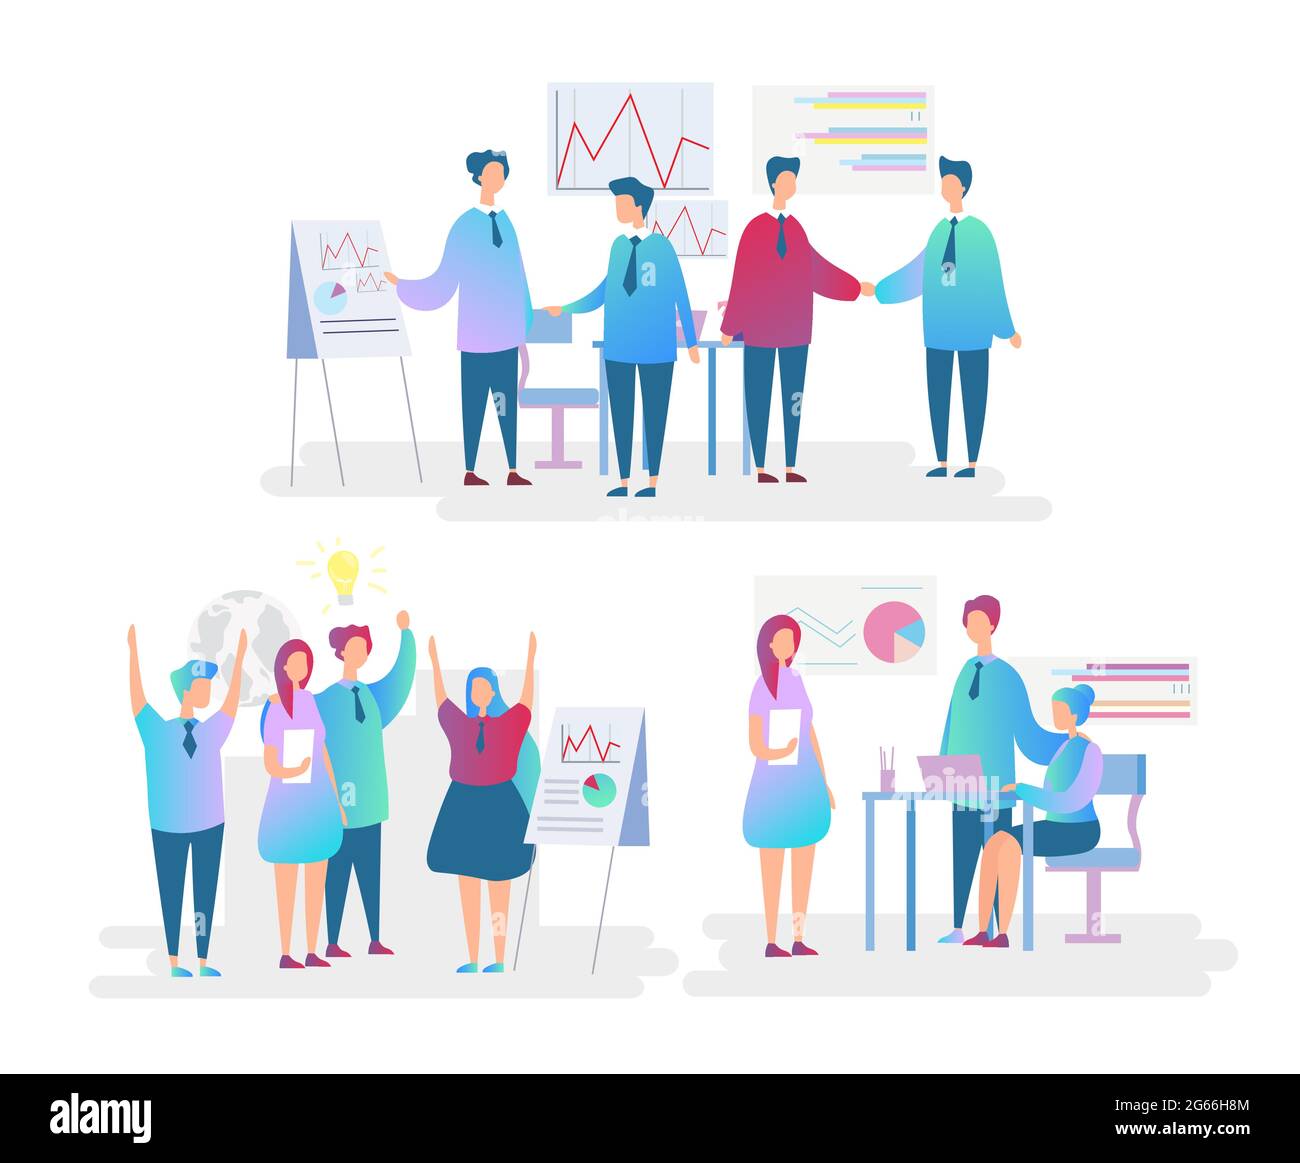 Office workers flat characters set. Employees teamwork and cooperation. Perspective discussion, strategy building, success achievement concept Stock Vector